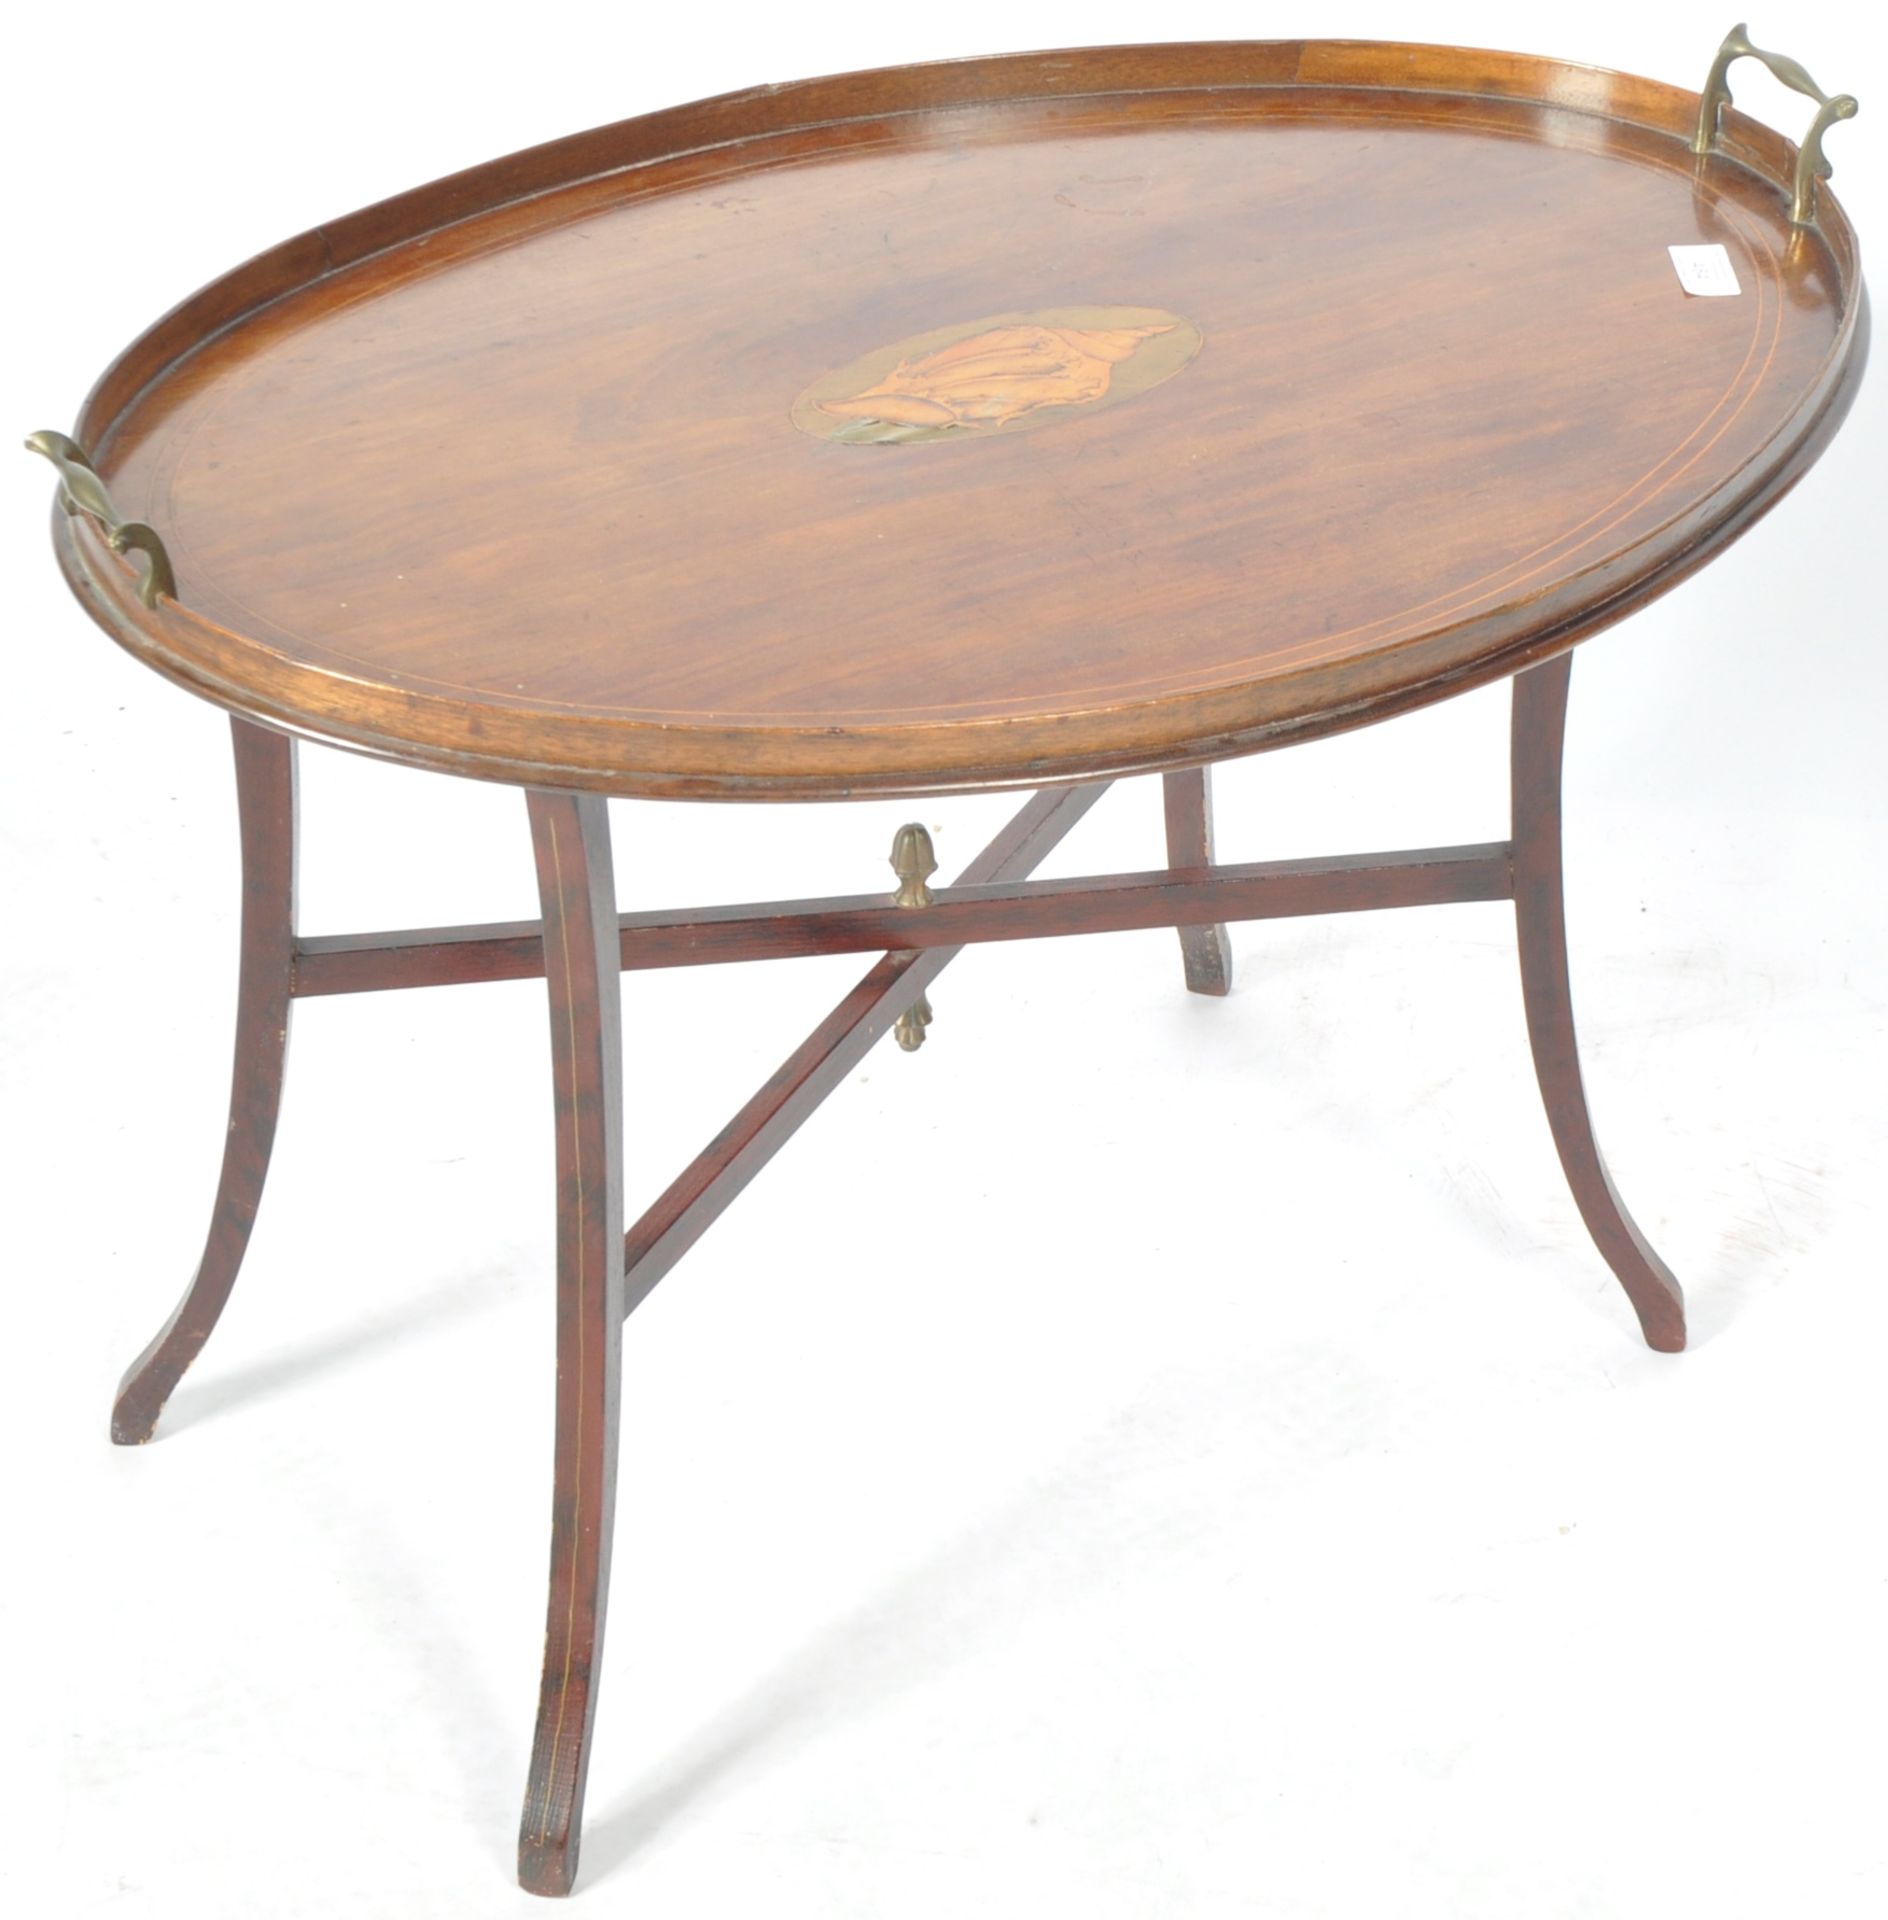 ANTIQUE GEORGIAN MAHOGANY BUTLERS TRAY ON STAND